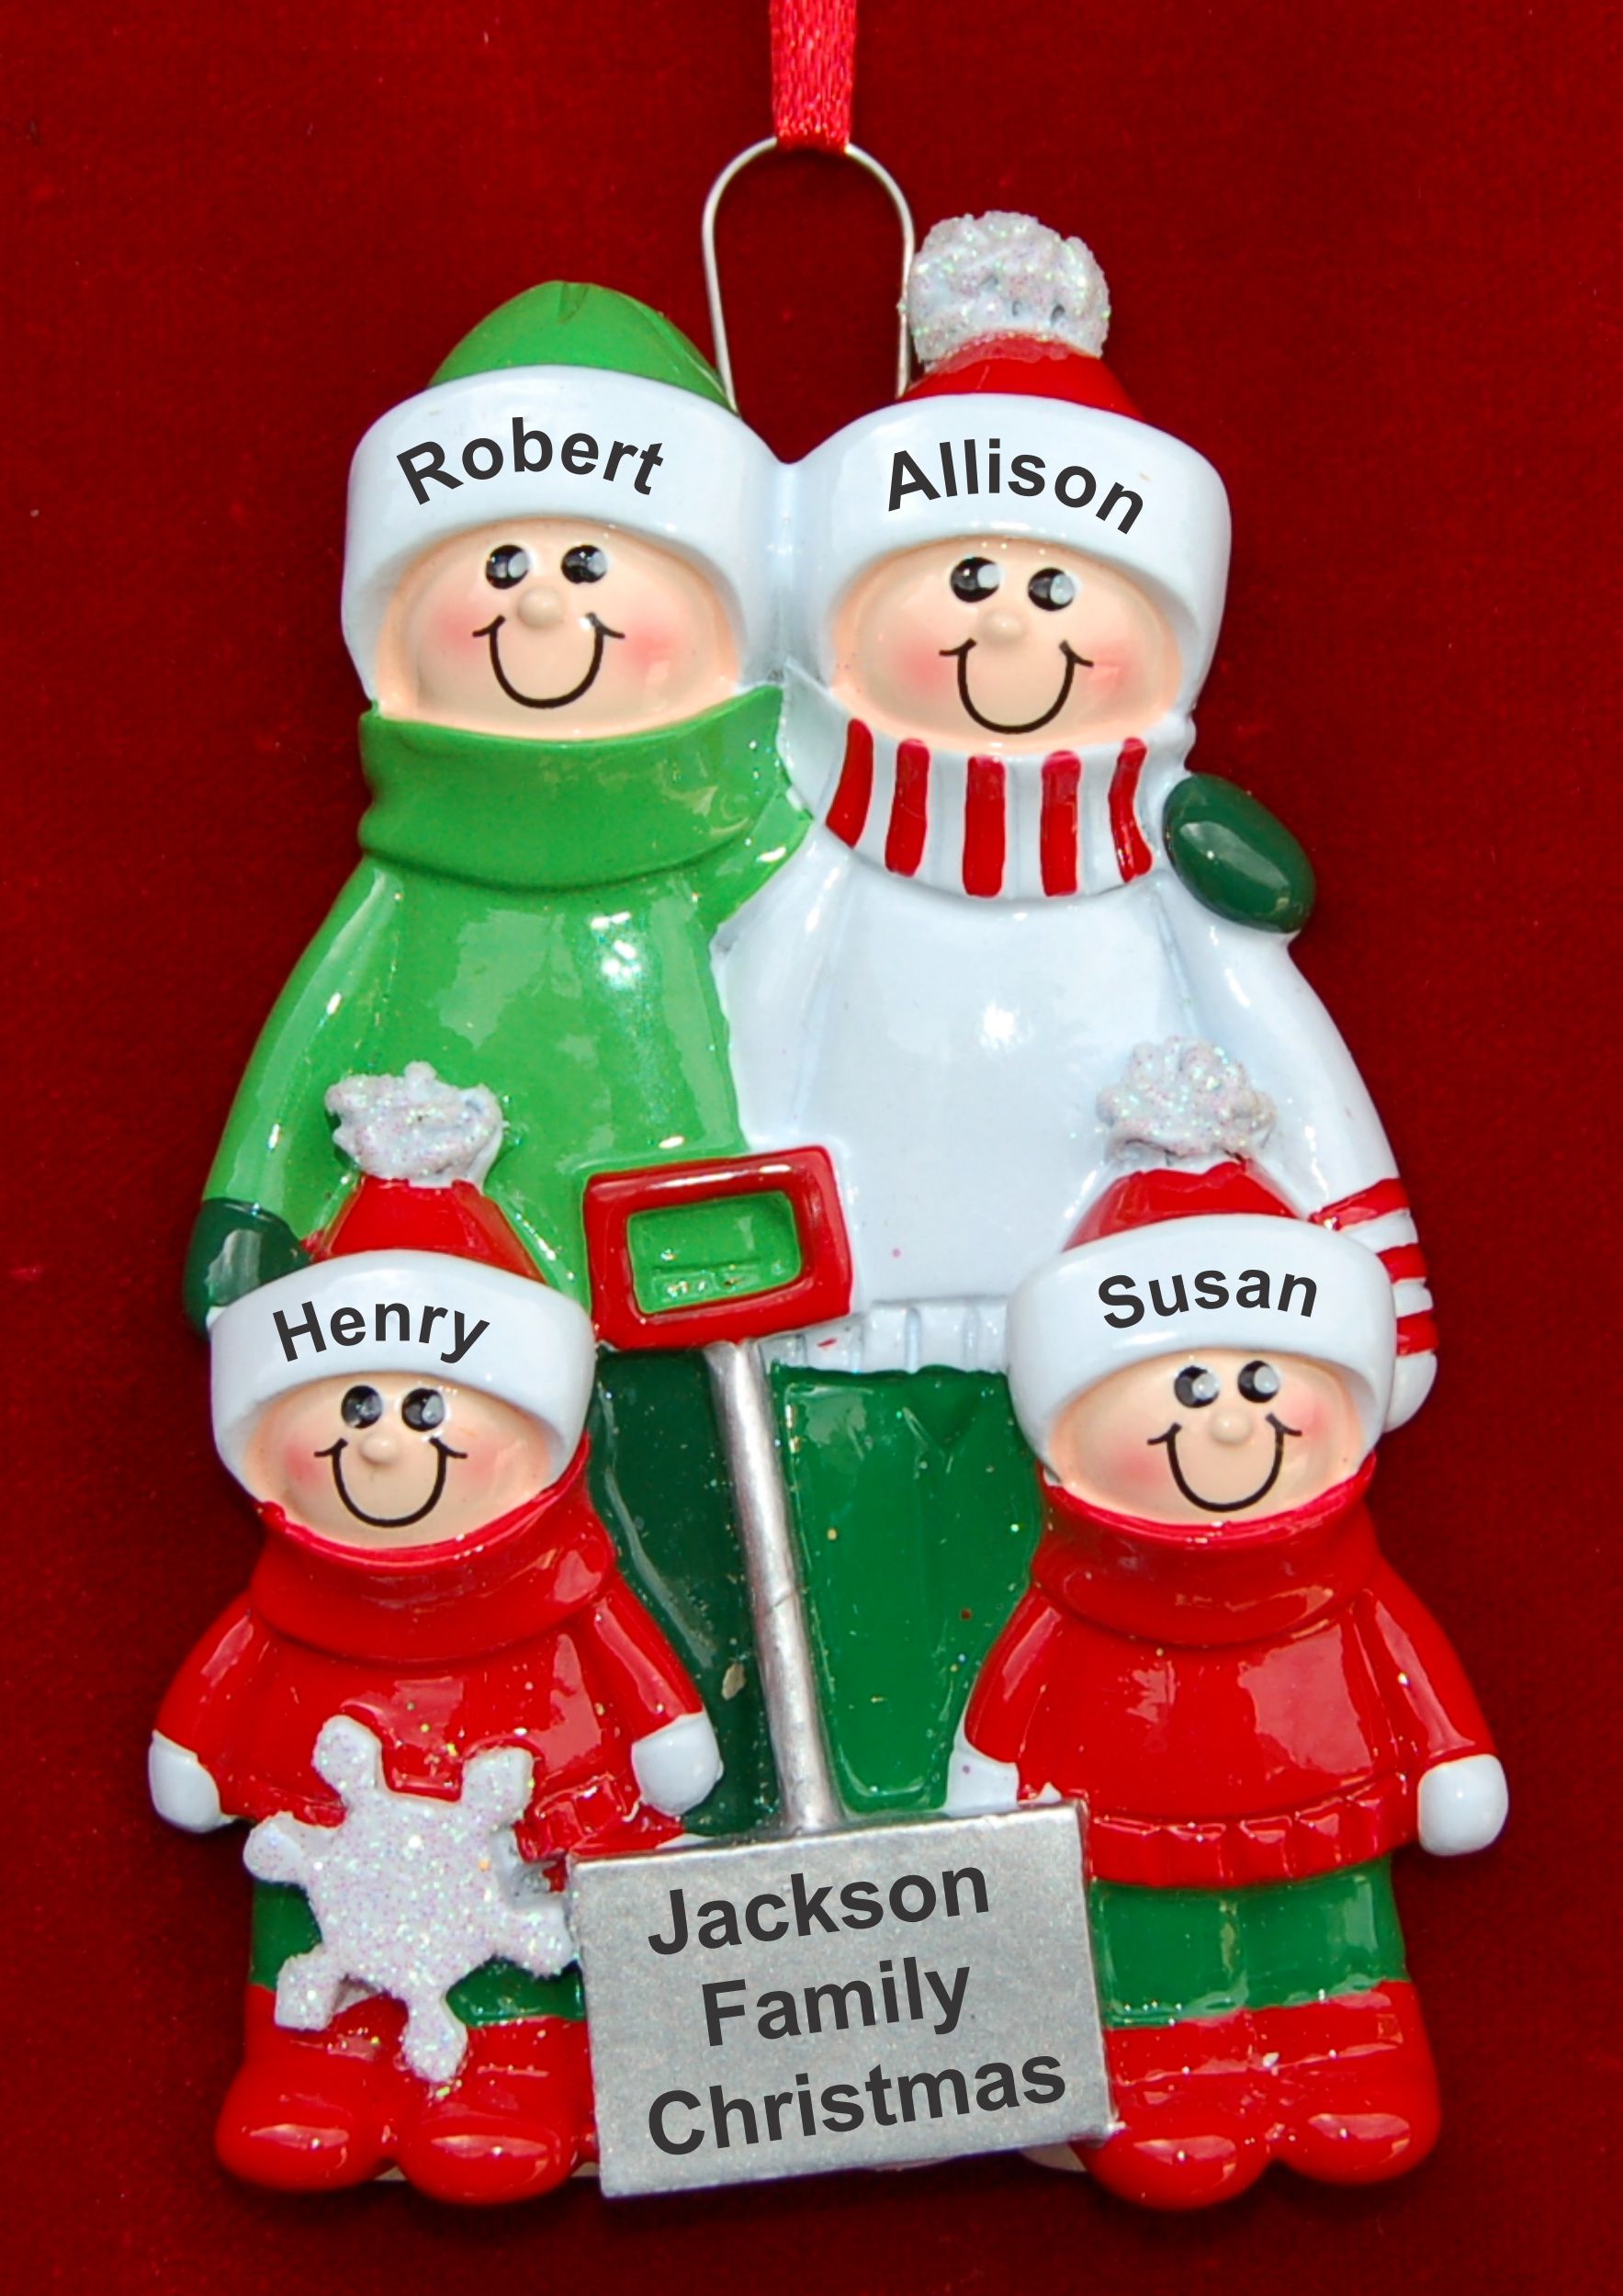 Winter Fun Family Christmas Ornament for 4 Personalized by RussellRhodes.com